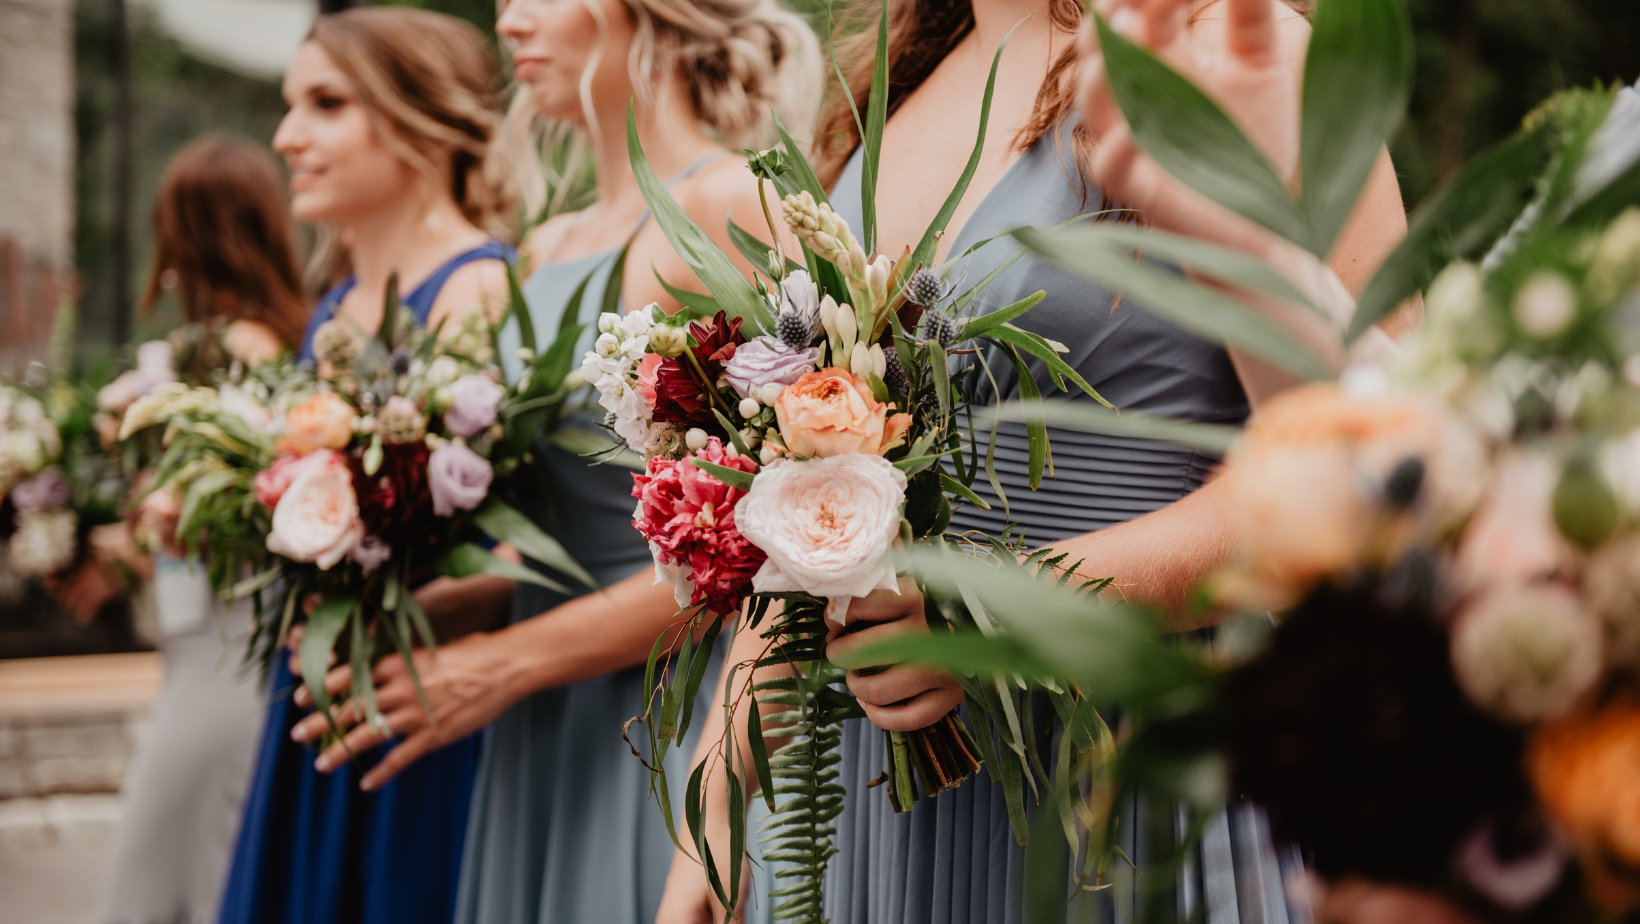 Who is Supposed to Pay for Bridesmaid Dresses?